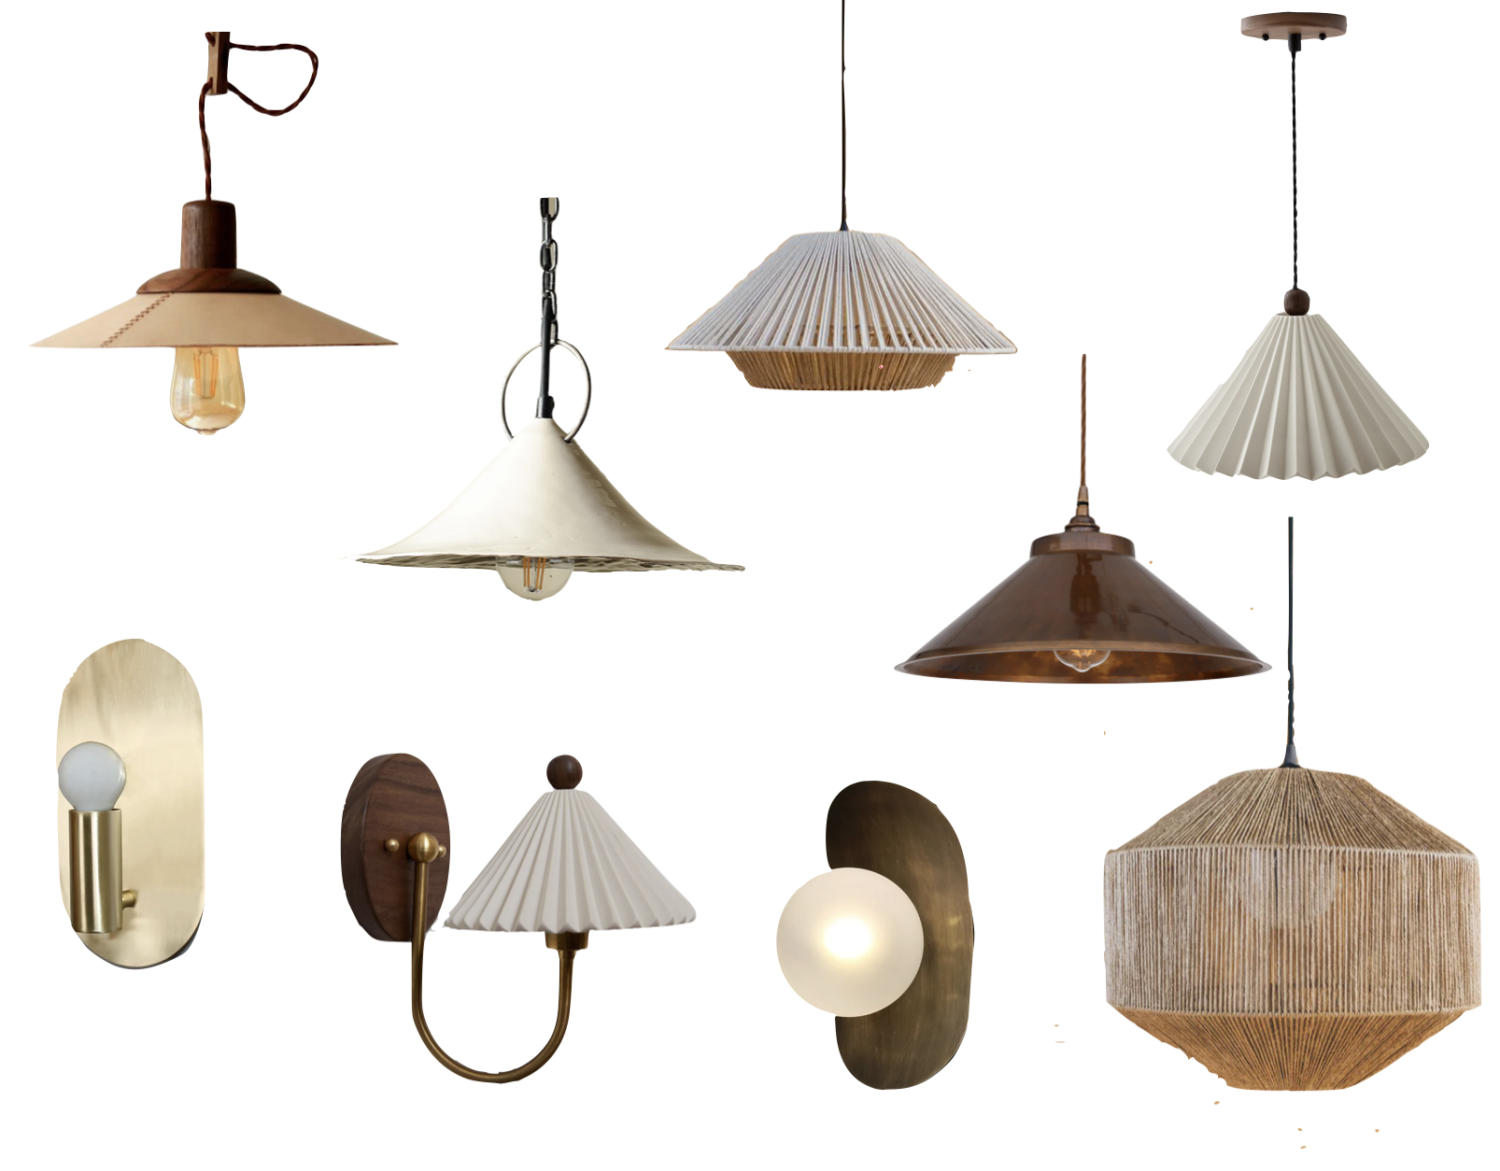 a curated collection of affordable and quality handcrafted lighting options from etsy